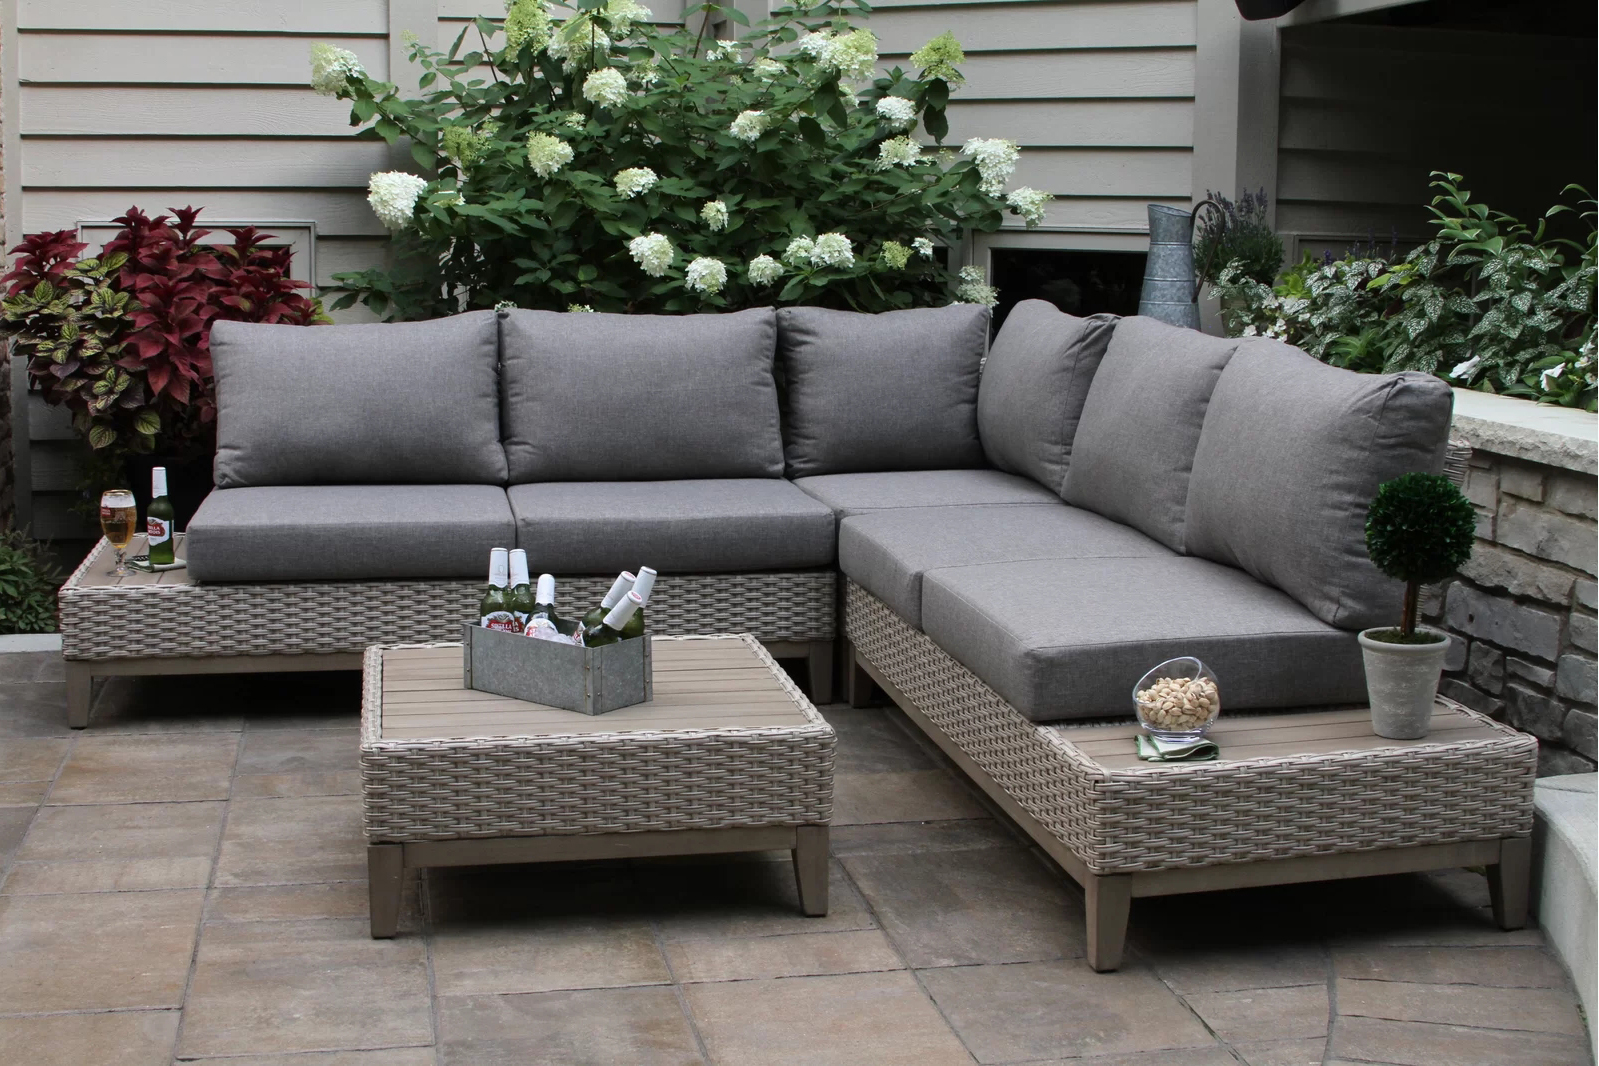 4 Piece Rattan Sectional Seating Group with Cushions